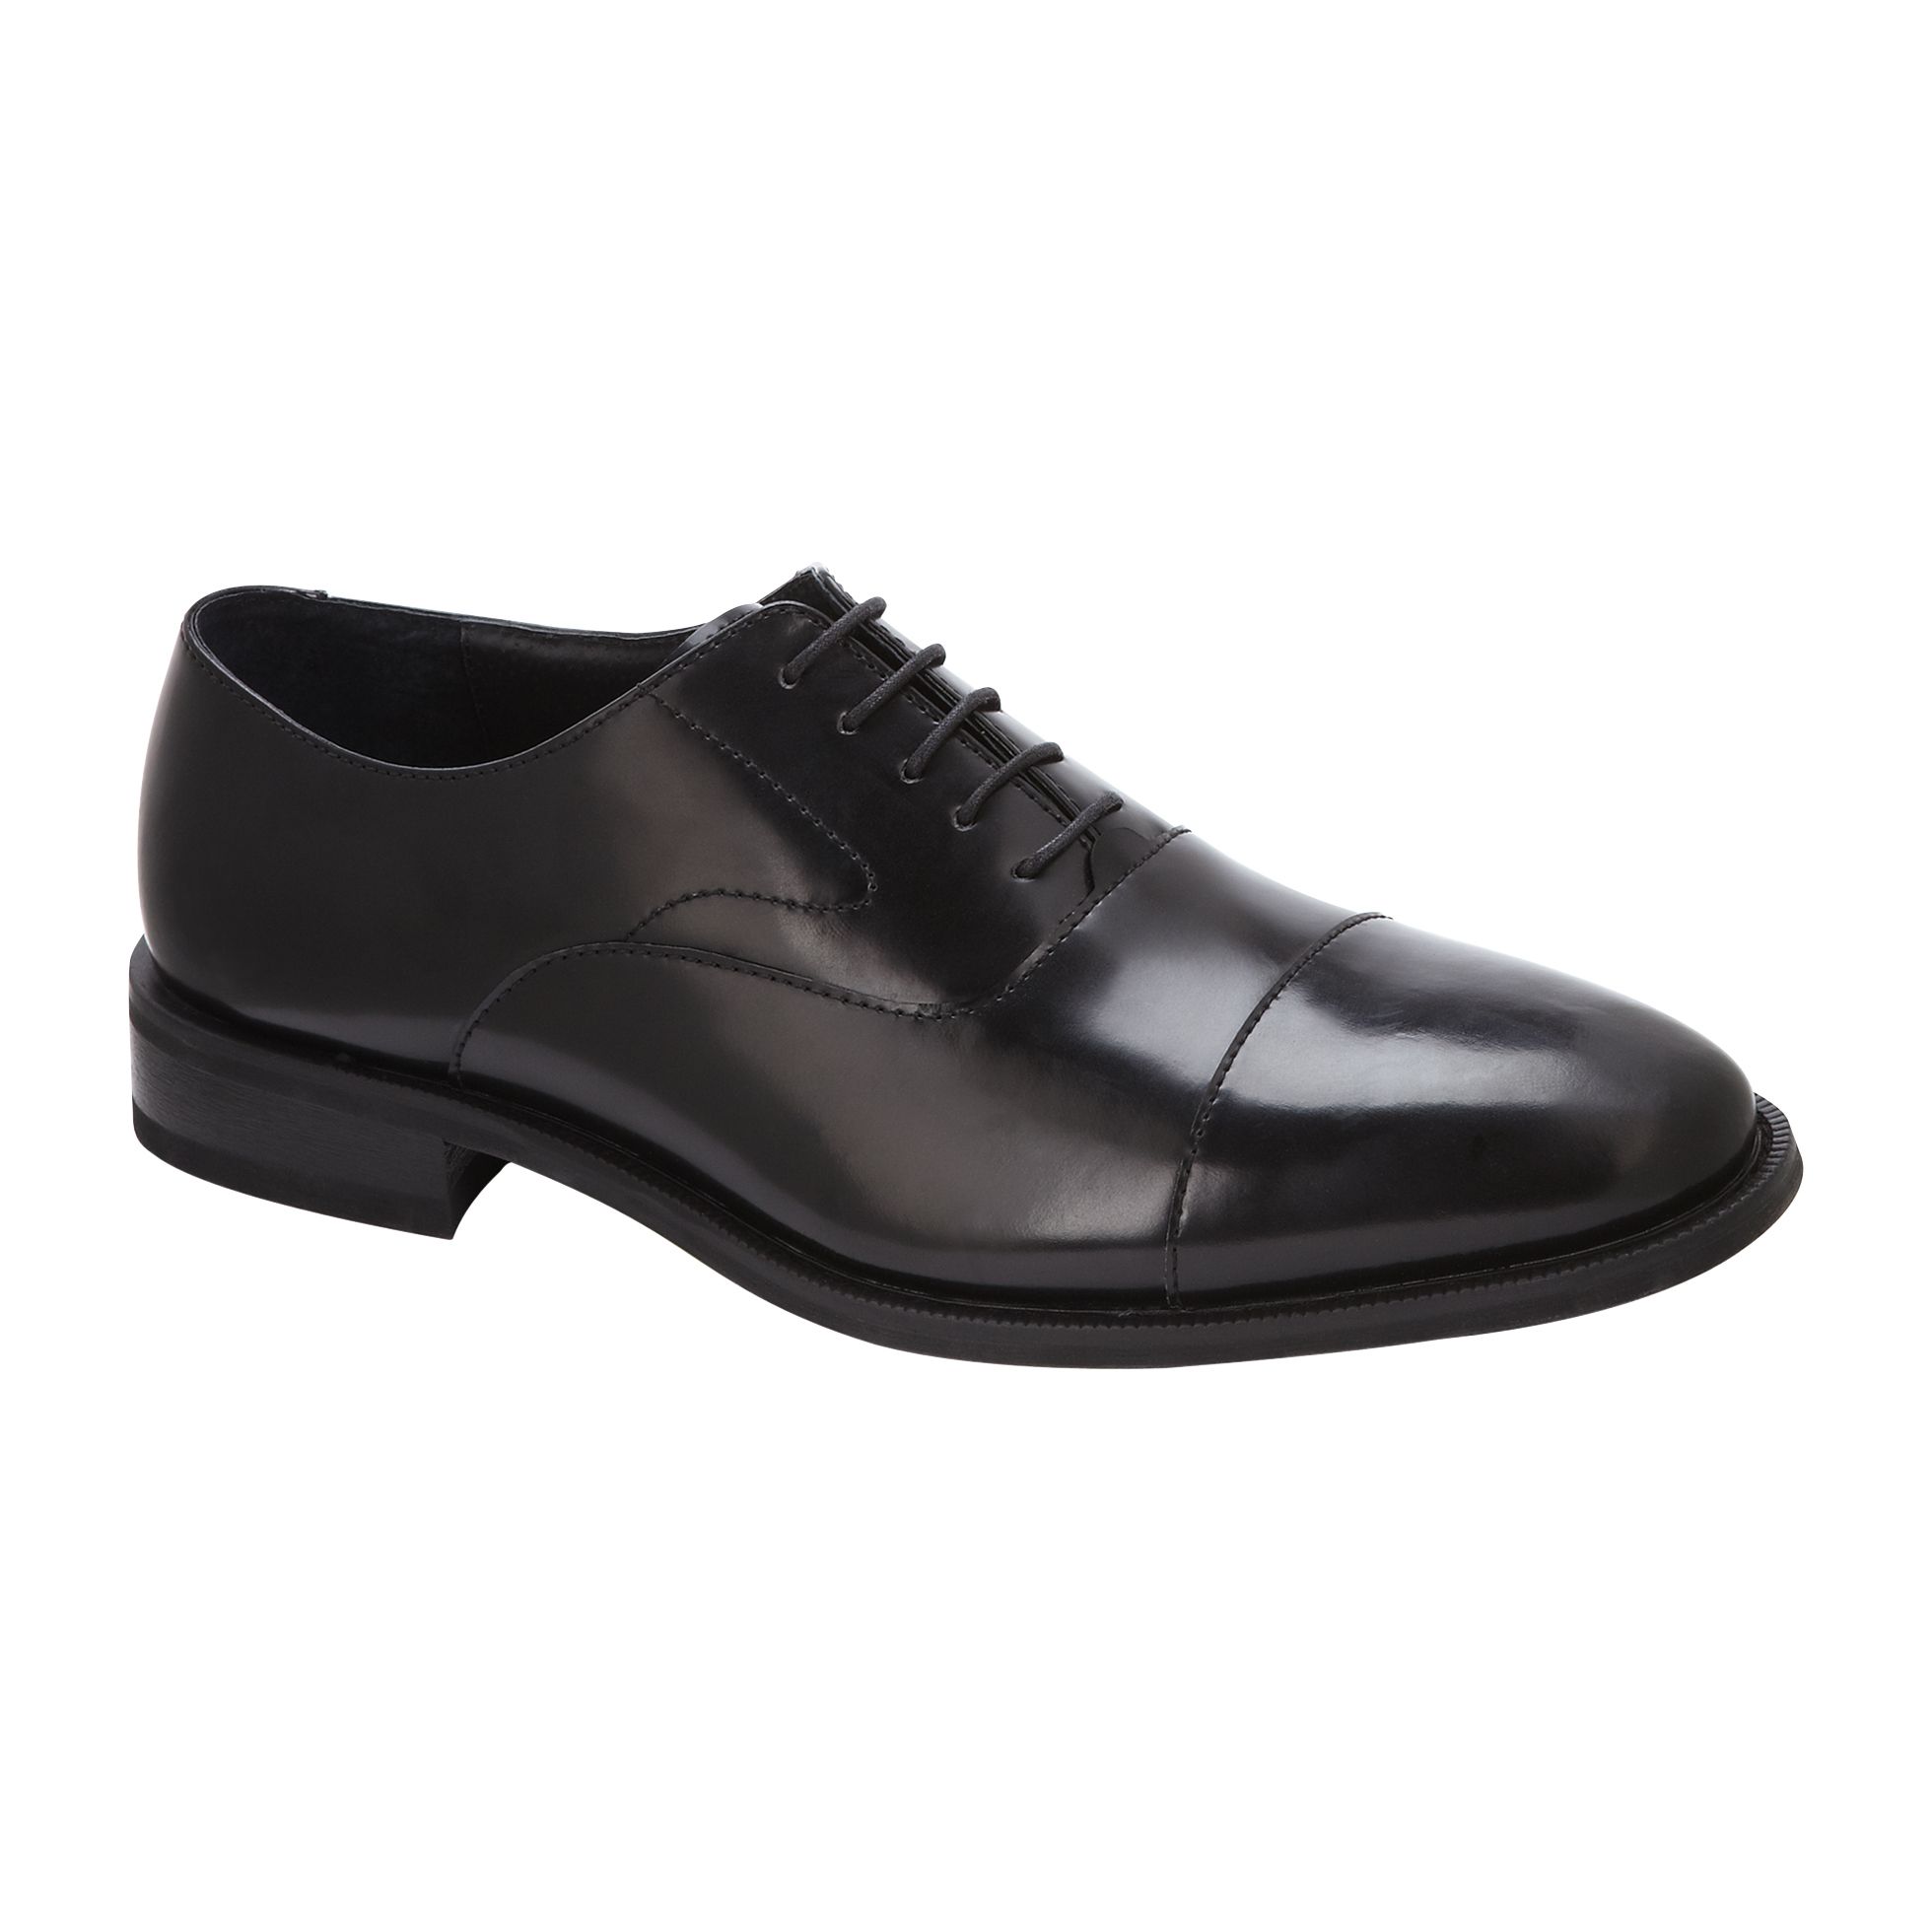 Thom McAn Men's Pressley - Black - Clothing, Shoes & Jewelry - Shoes ...